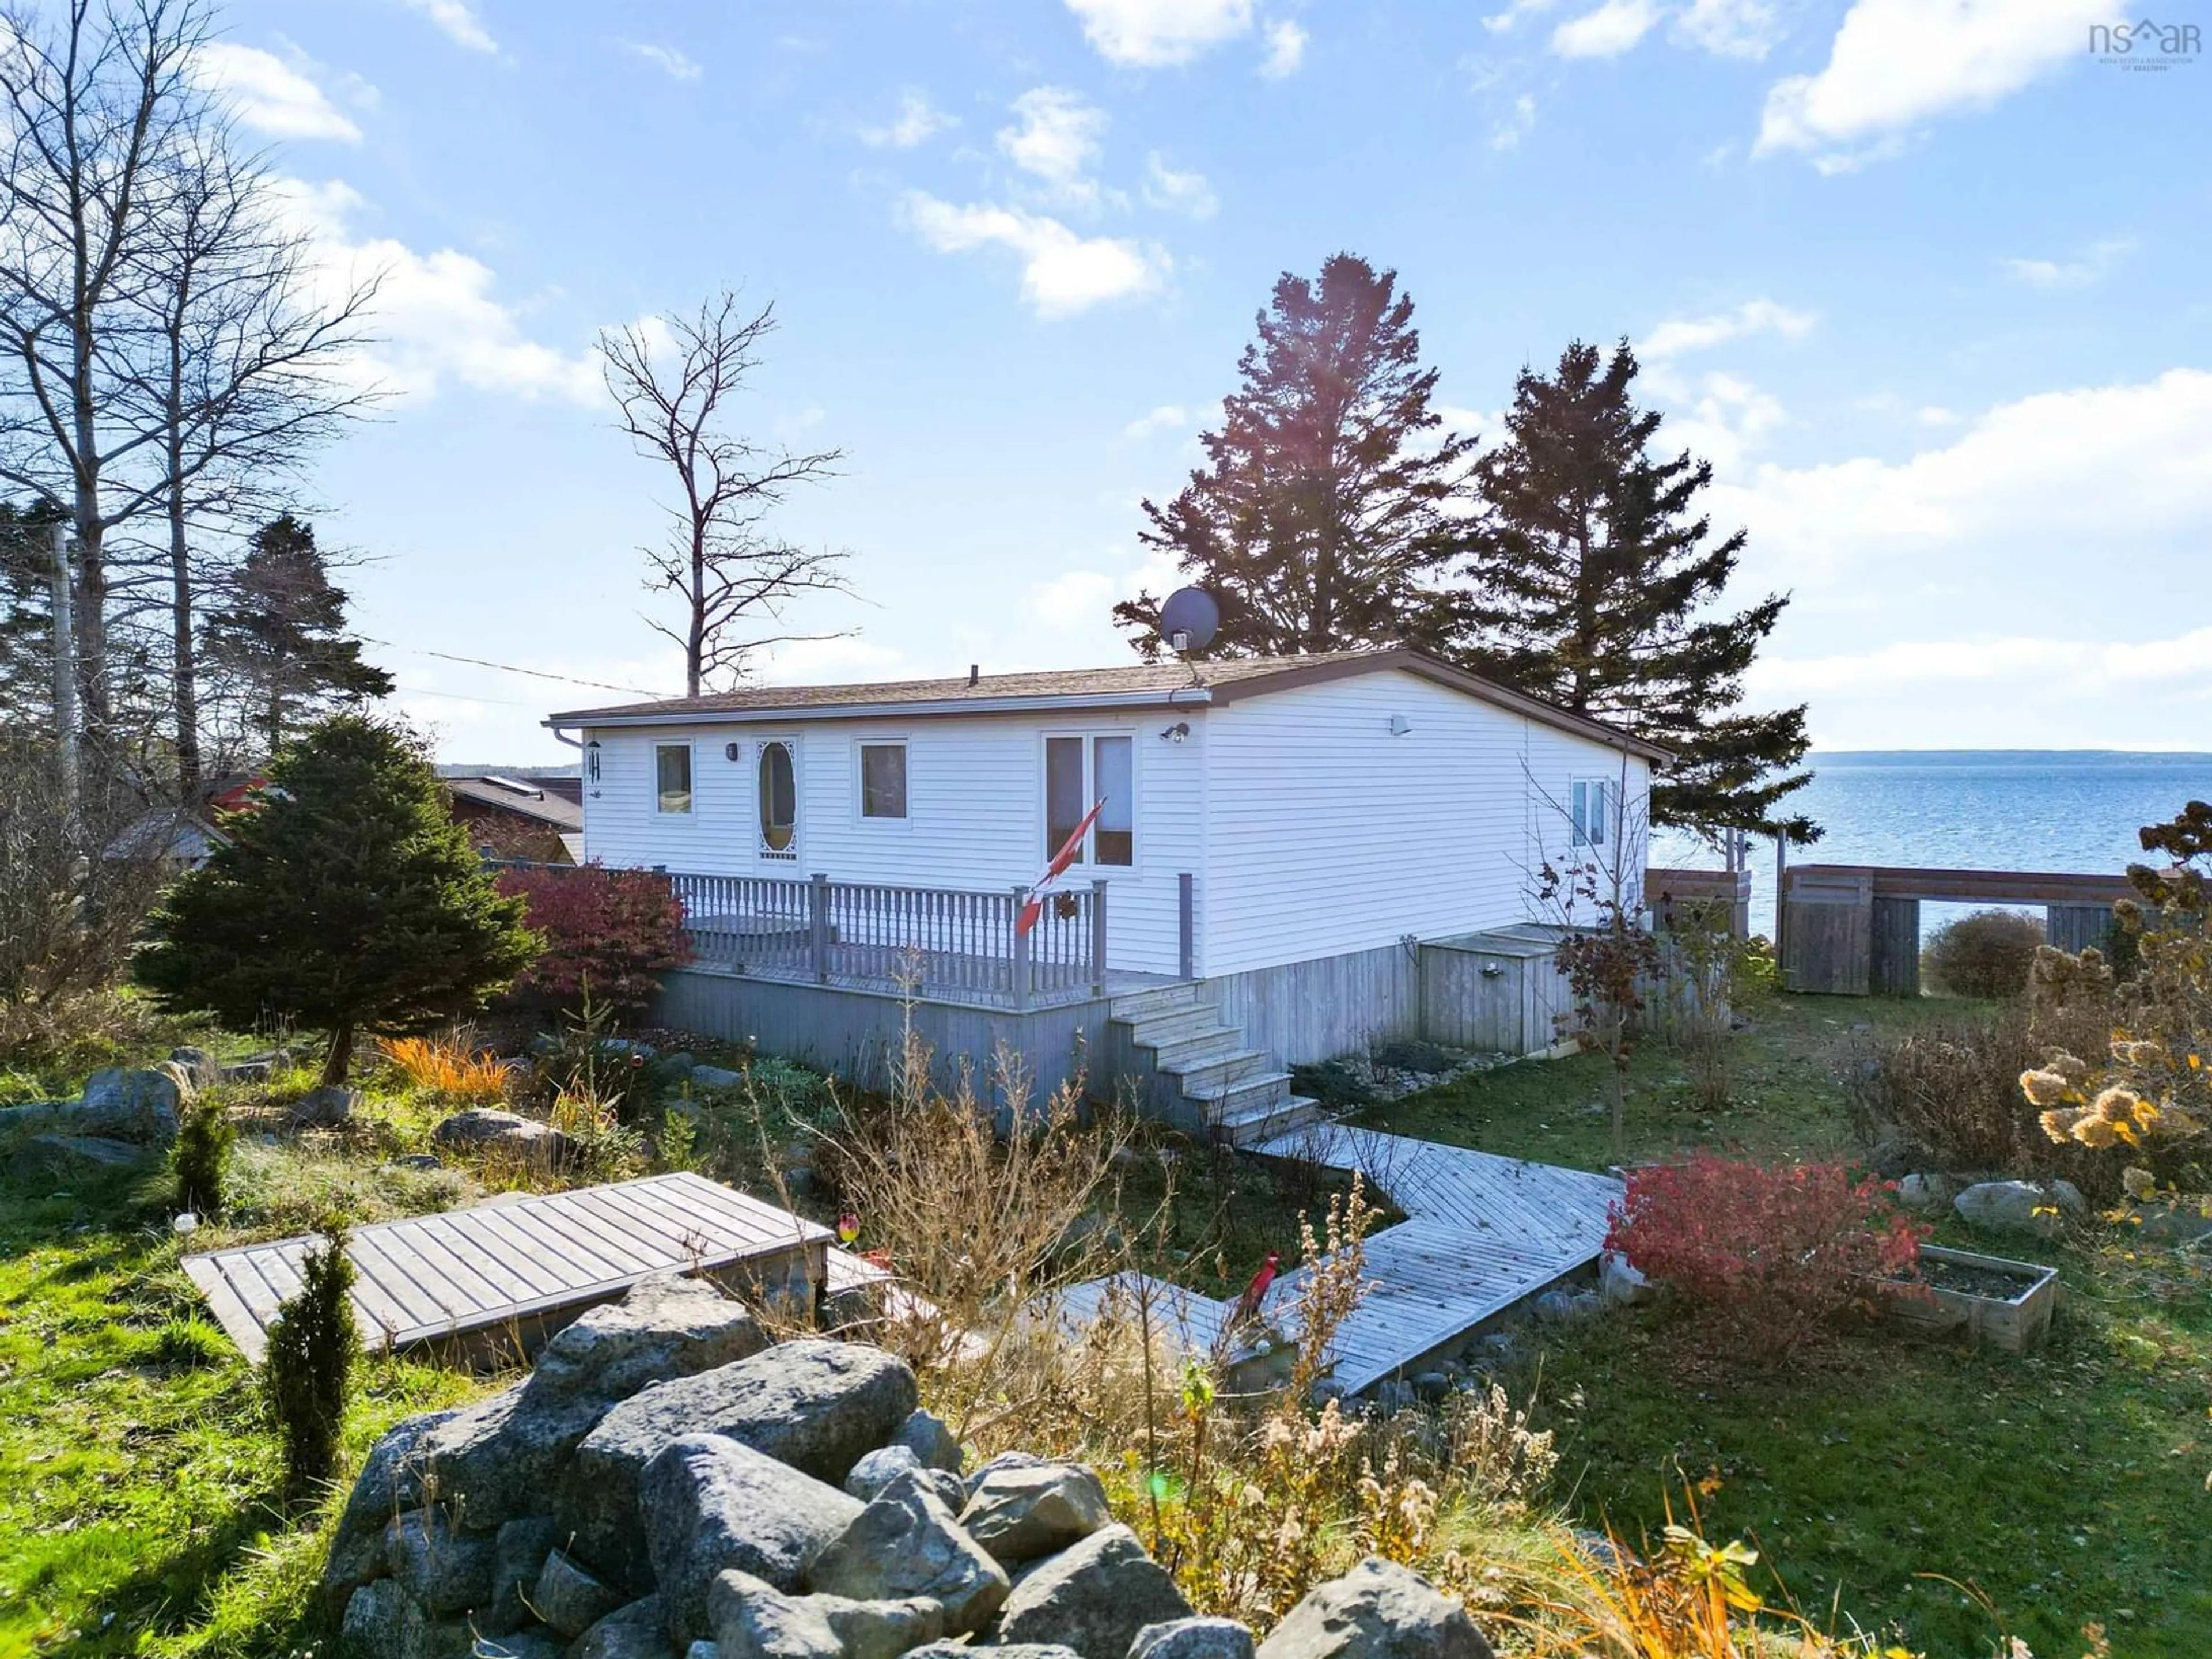 Home with unknown exterior material for 16 Seaview Lane, Seabright Nova Scotia B3Z 2Y6